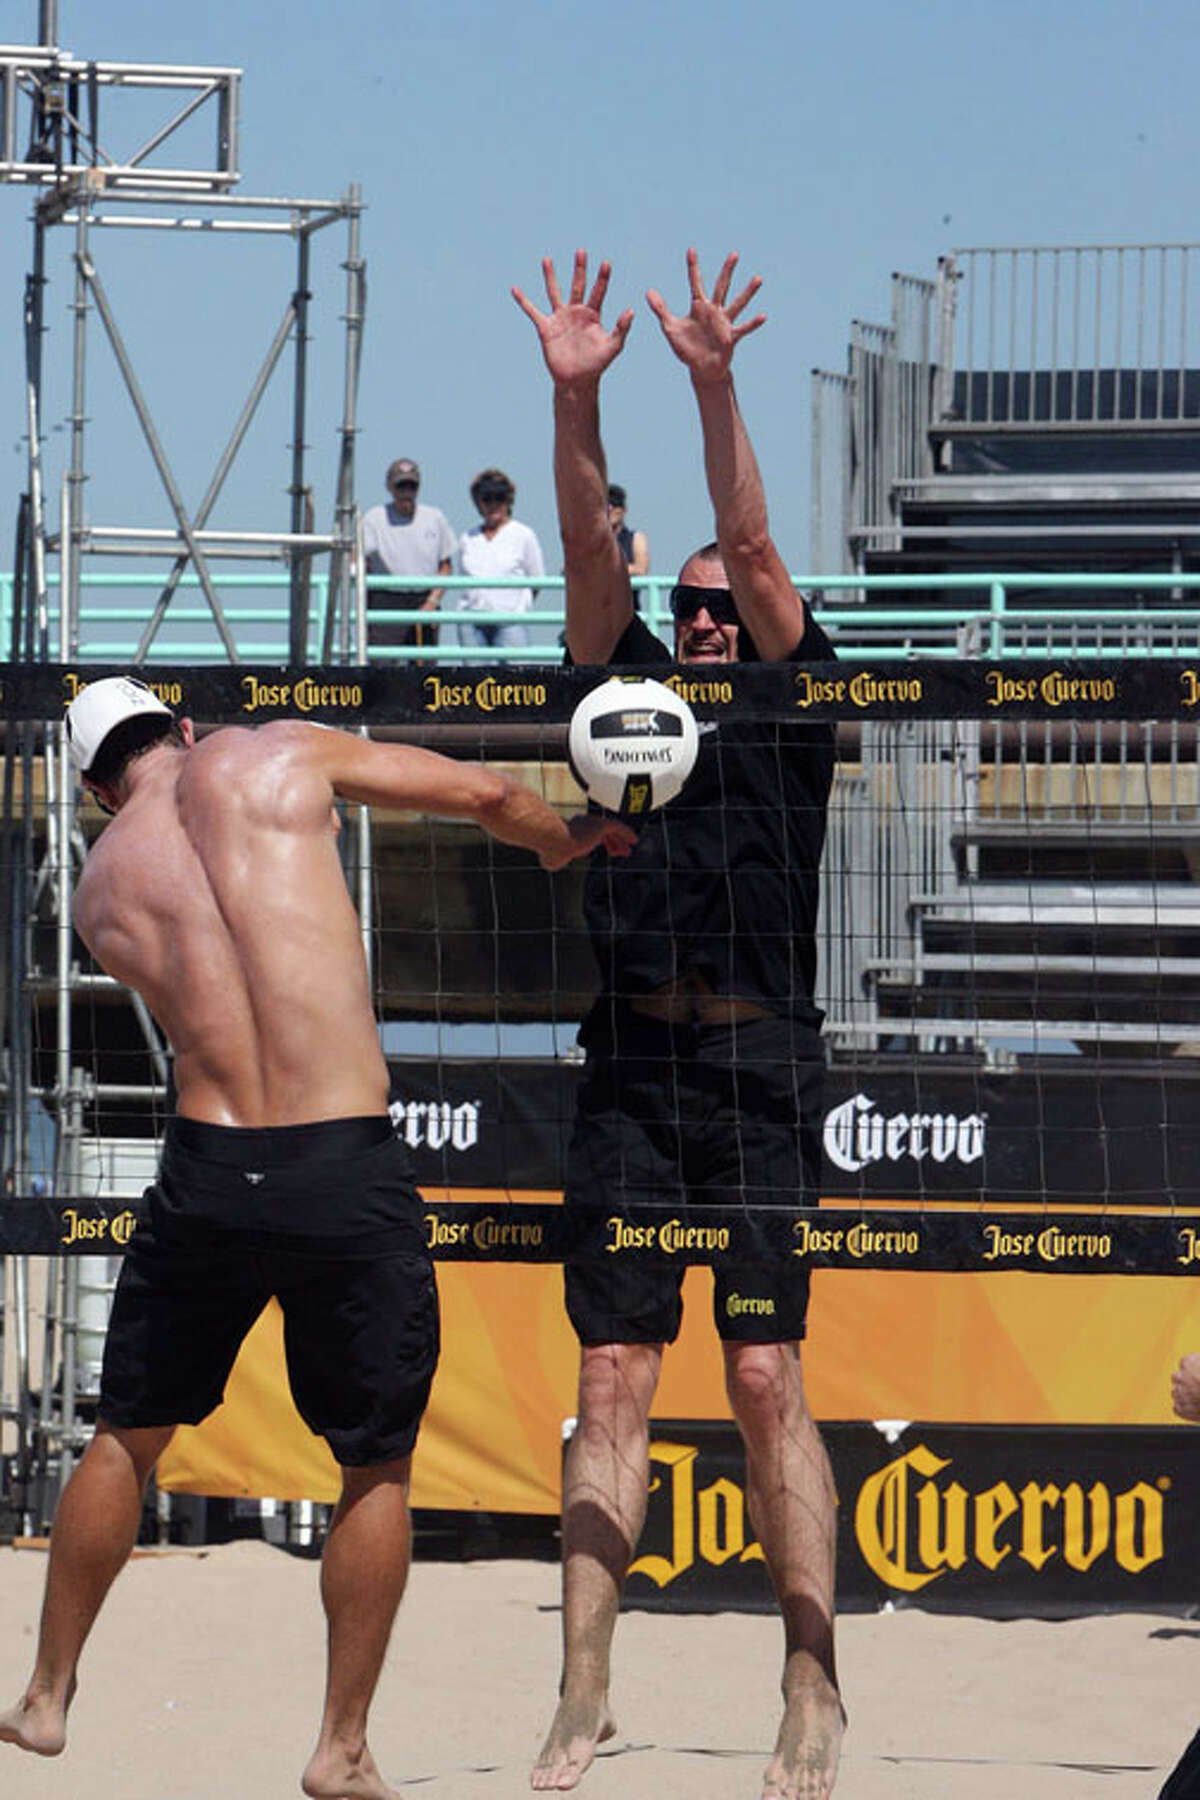 All-Star basketball player Kevin Love has found a new sport to play during the NBA lockout. The 6'10 Timberwolves forward will hit the sand to compete in the Manhattan Beach Open, part of the Jose Cuervo Pro Beach Volleyball Series. Of his move to the beach, Love said, "I have always been a fan of beach volleyball...I'm tall, I'm quick, I can jump, and I've spent some time playing beach volleyball during my time in Los Angeles. Now that I have to start thinking about a backup plan with the basketball lockout, I thought 'why not?'" Click through the slideshow to see more of Kevin Love in action.